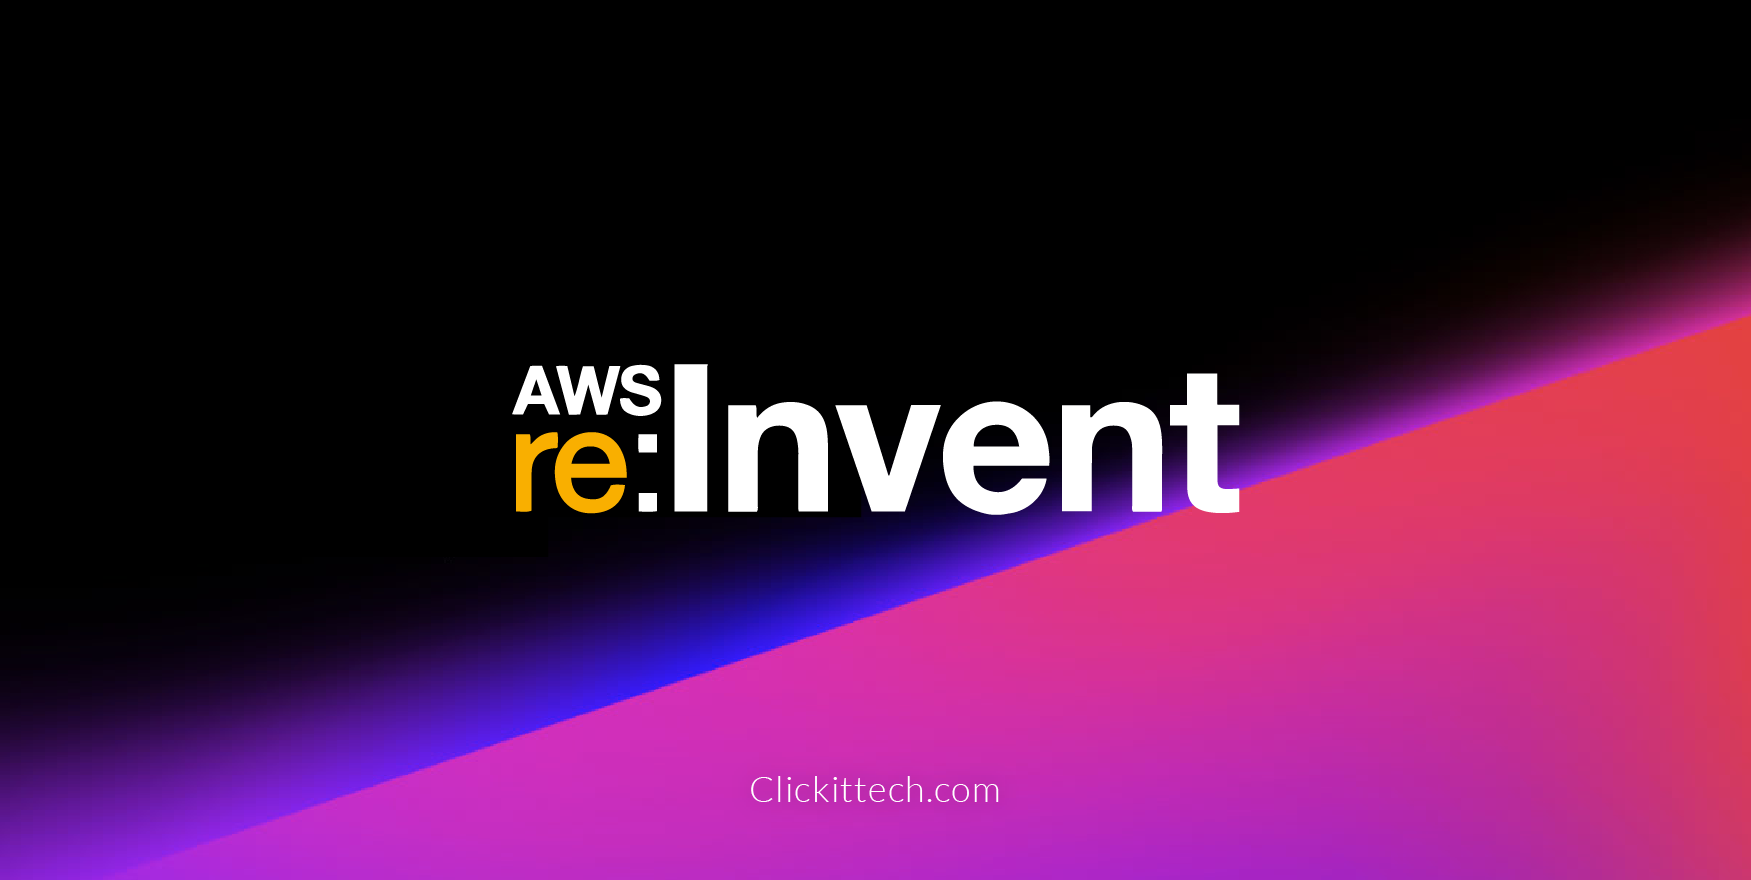 Welcome to AWS reinvent 2018